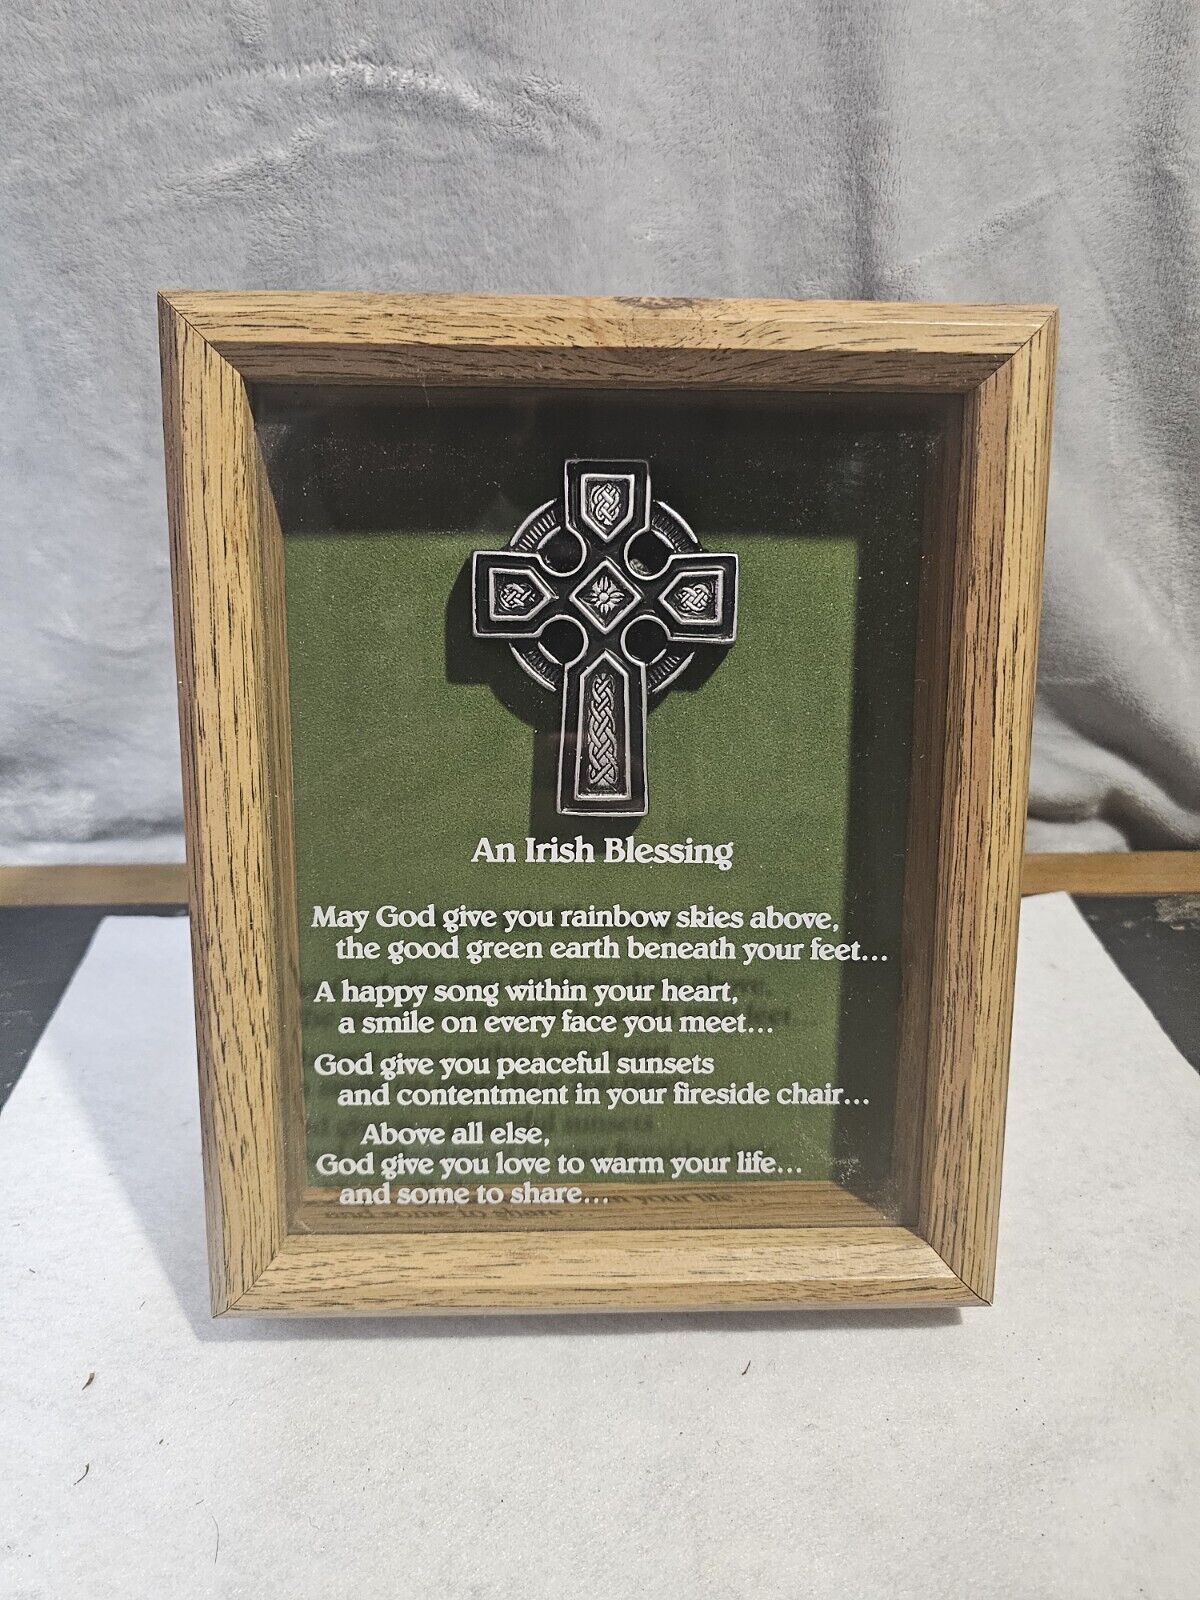 Vintage Rare Miller Studio Ohio An Irish Blessing Wall Plaque With Cross Wood